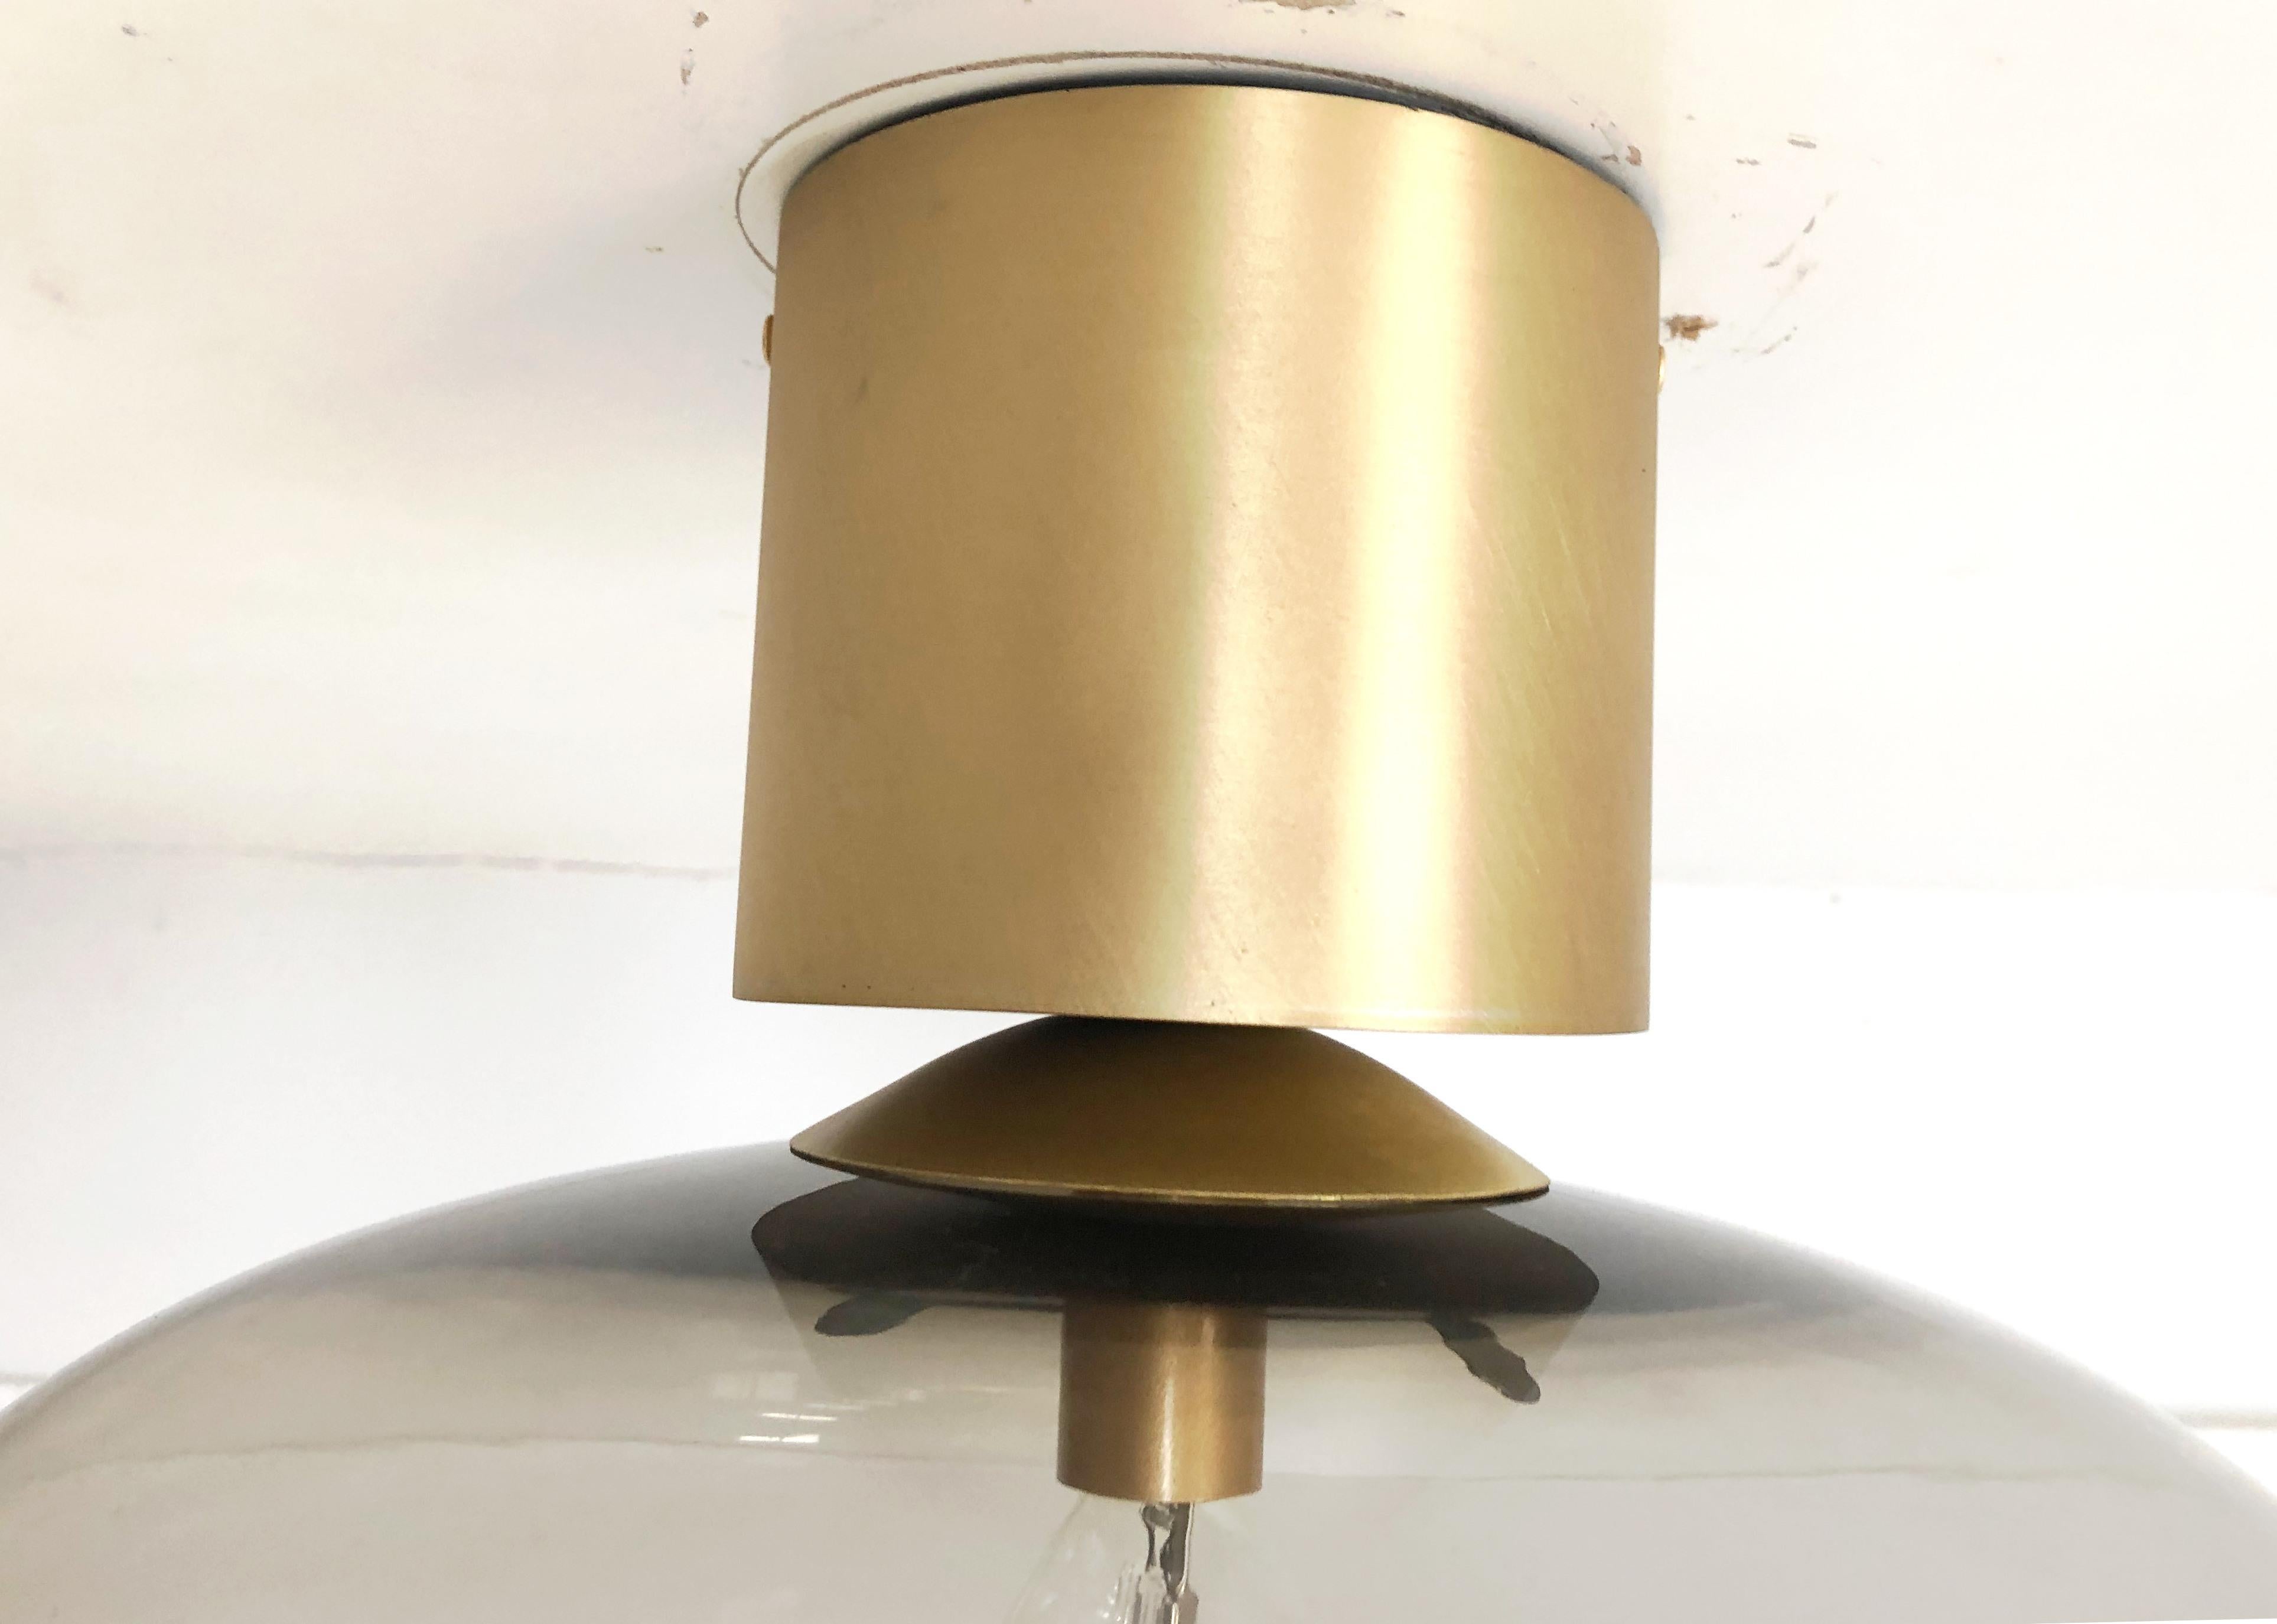 UNO SHADE Sconce / Flush Mount by Fabio Ltd In New Condition For Sale In Los Angeles, CA